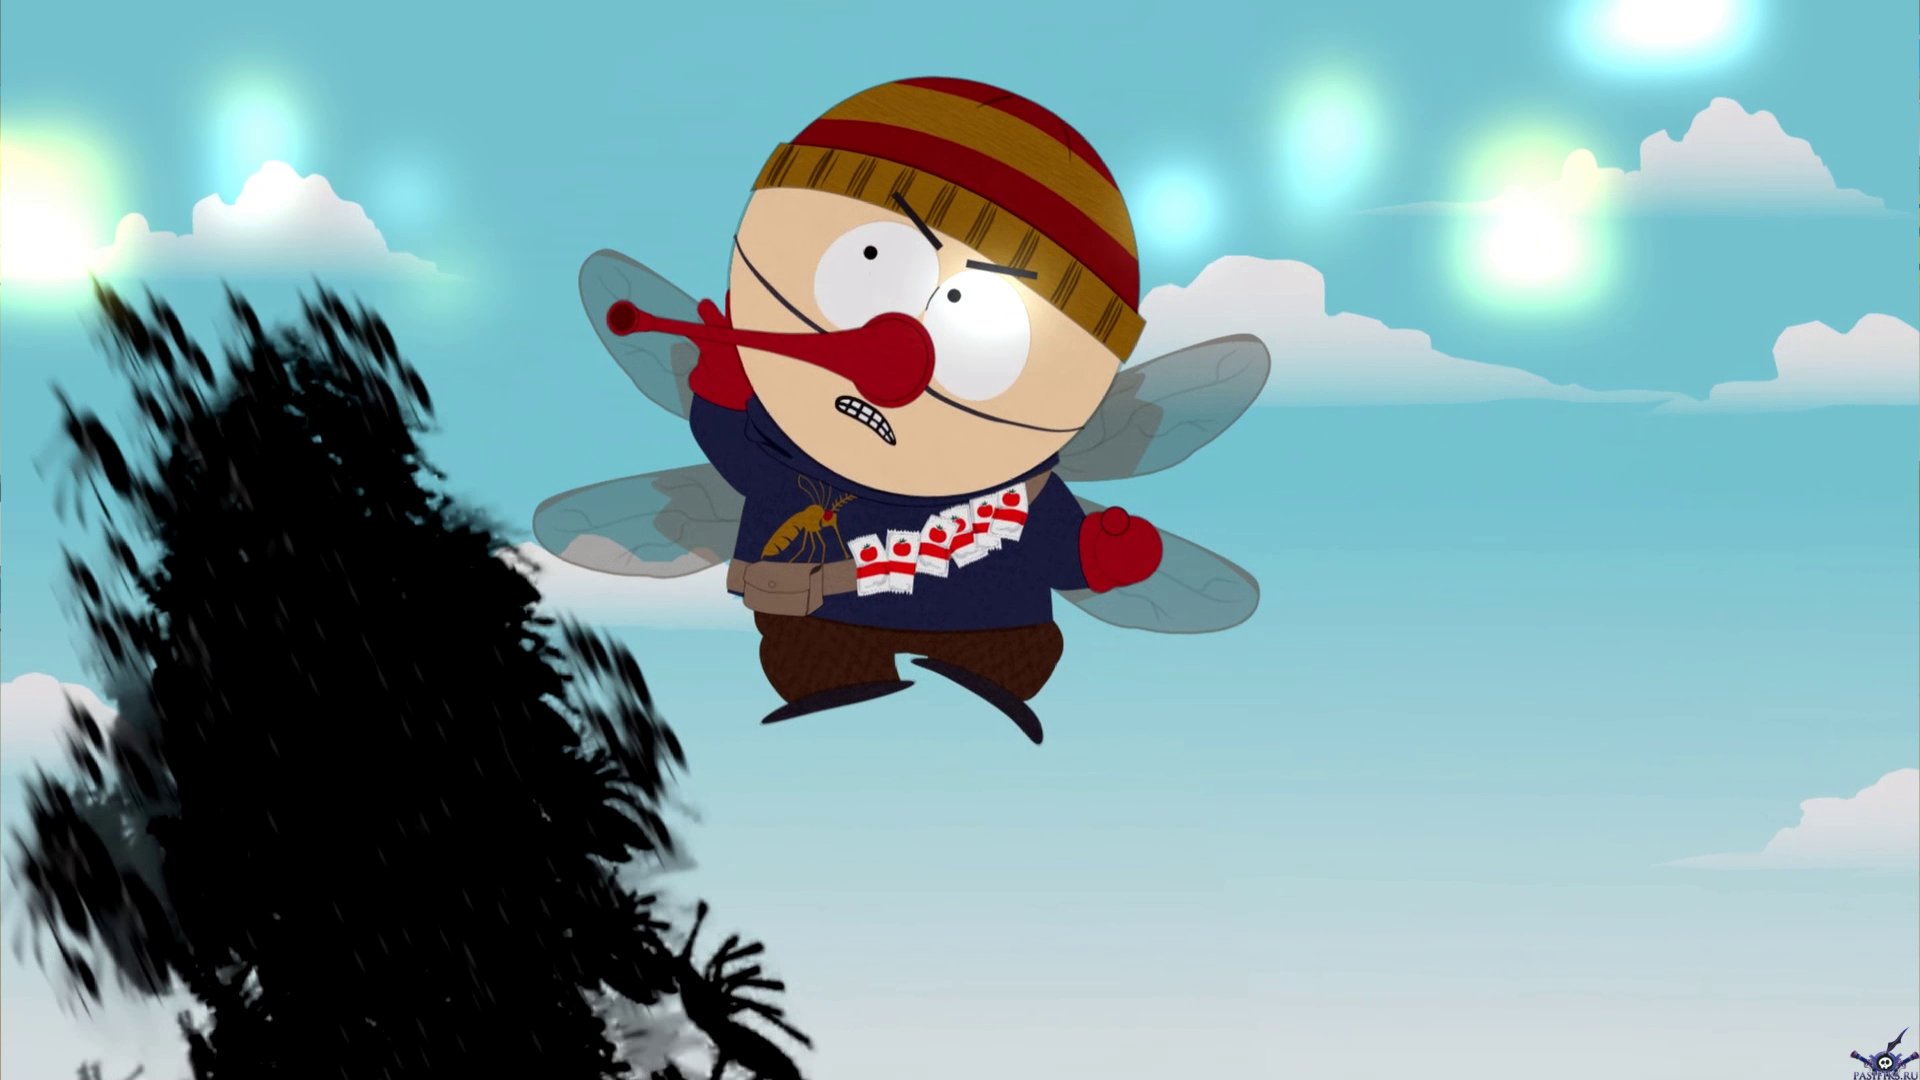 pc-7-south-park-the-fractured-but-whole---moskit-v-lovushke